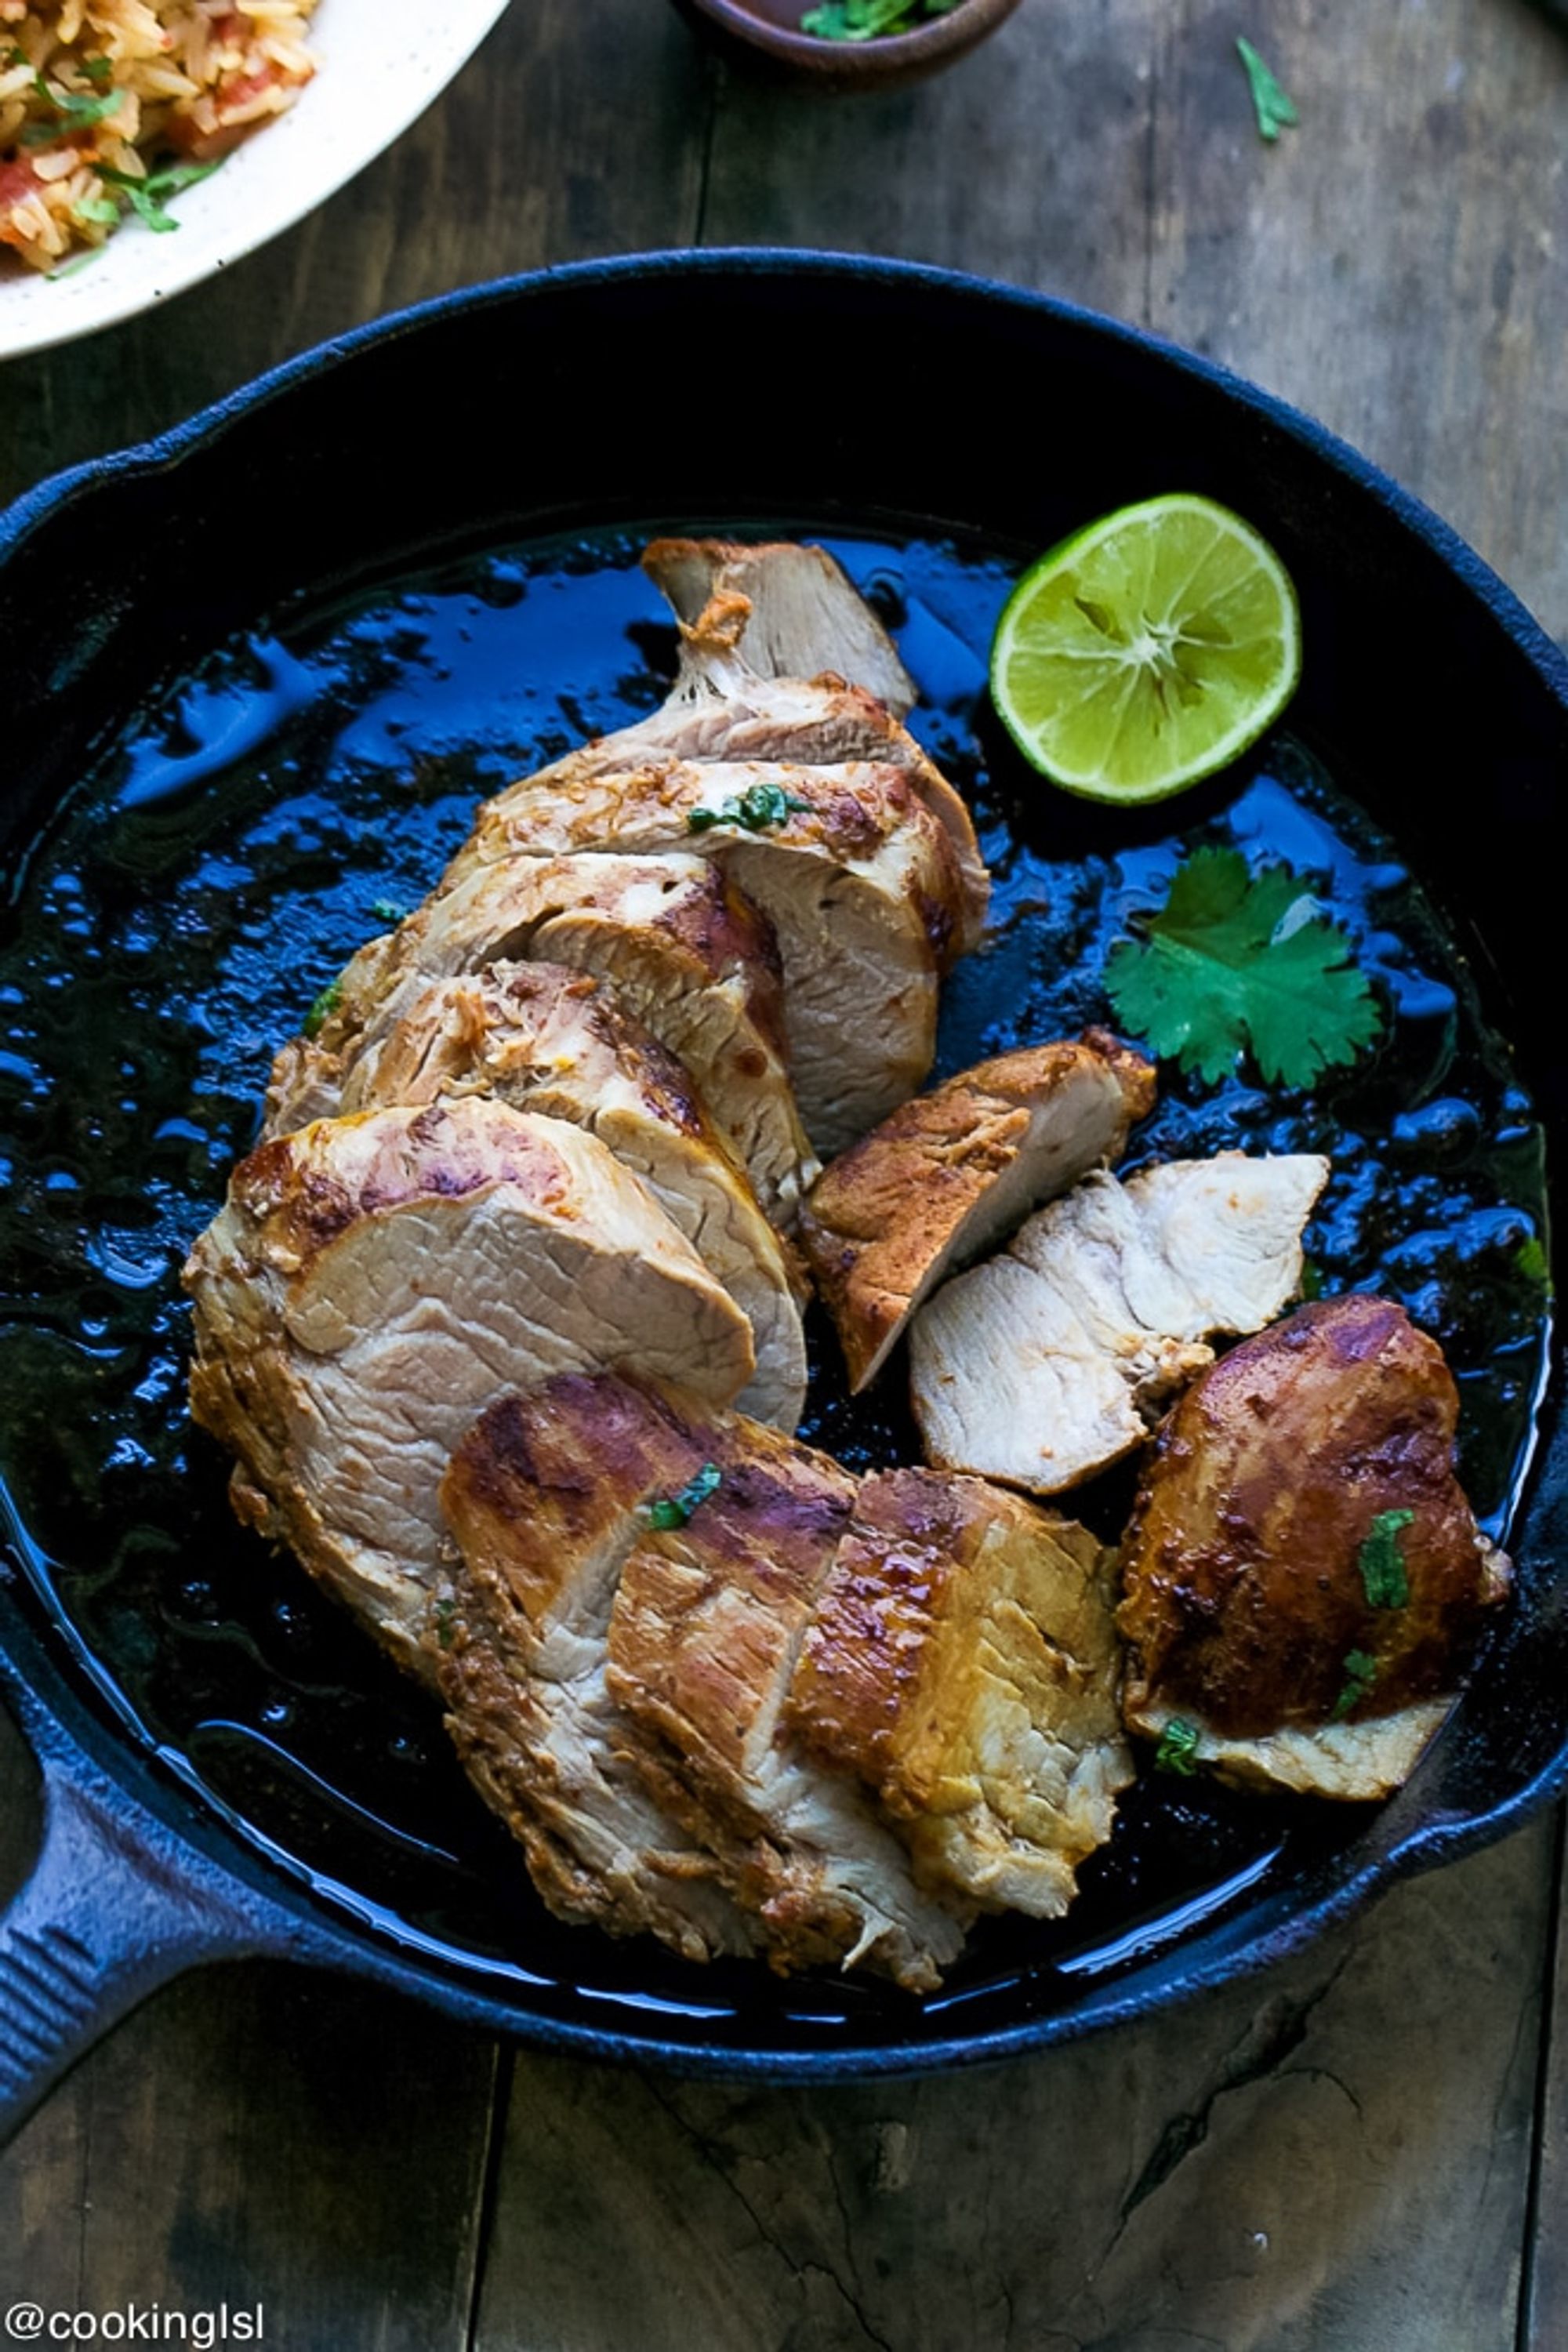 Chipotle Pork Tenderloin And Mexican Rice Recipe - Cooking LSL - My ...